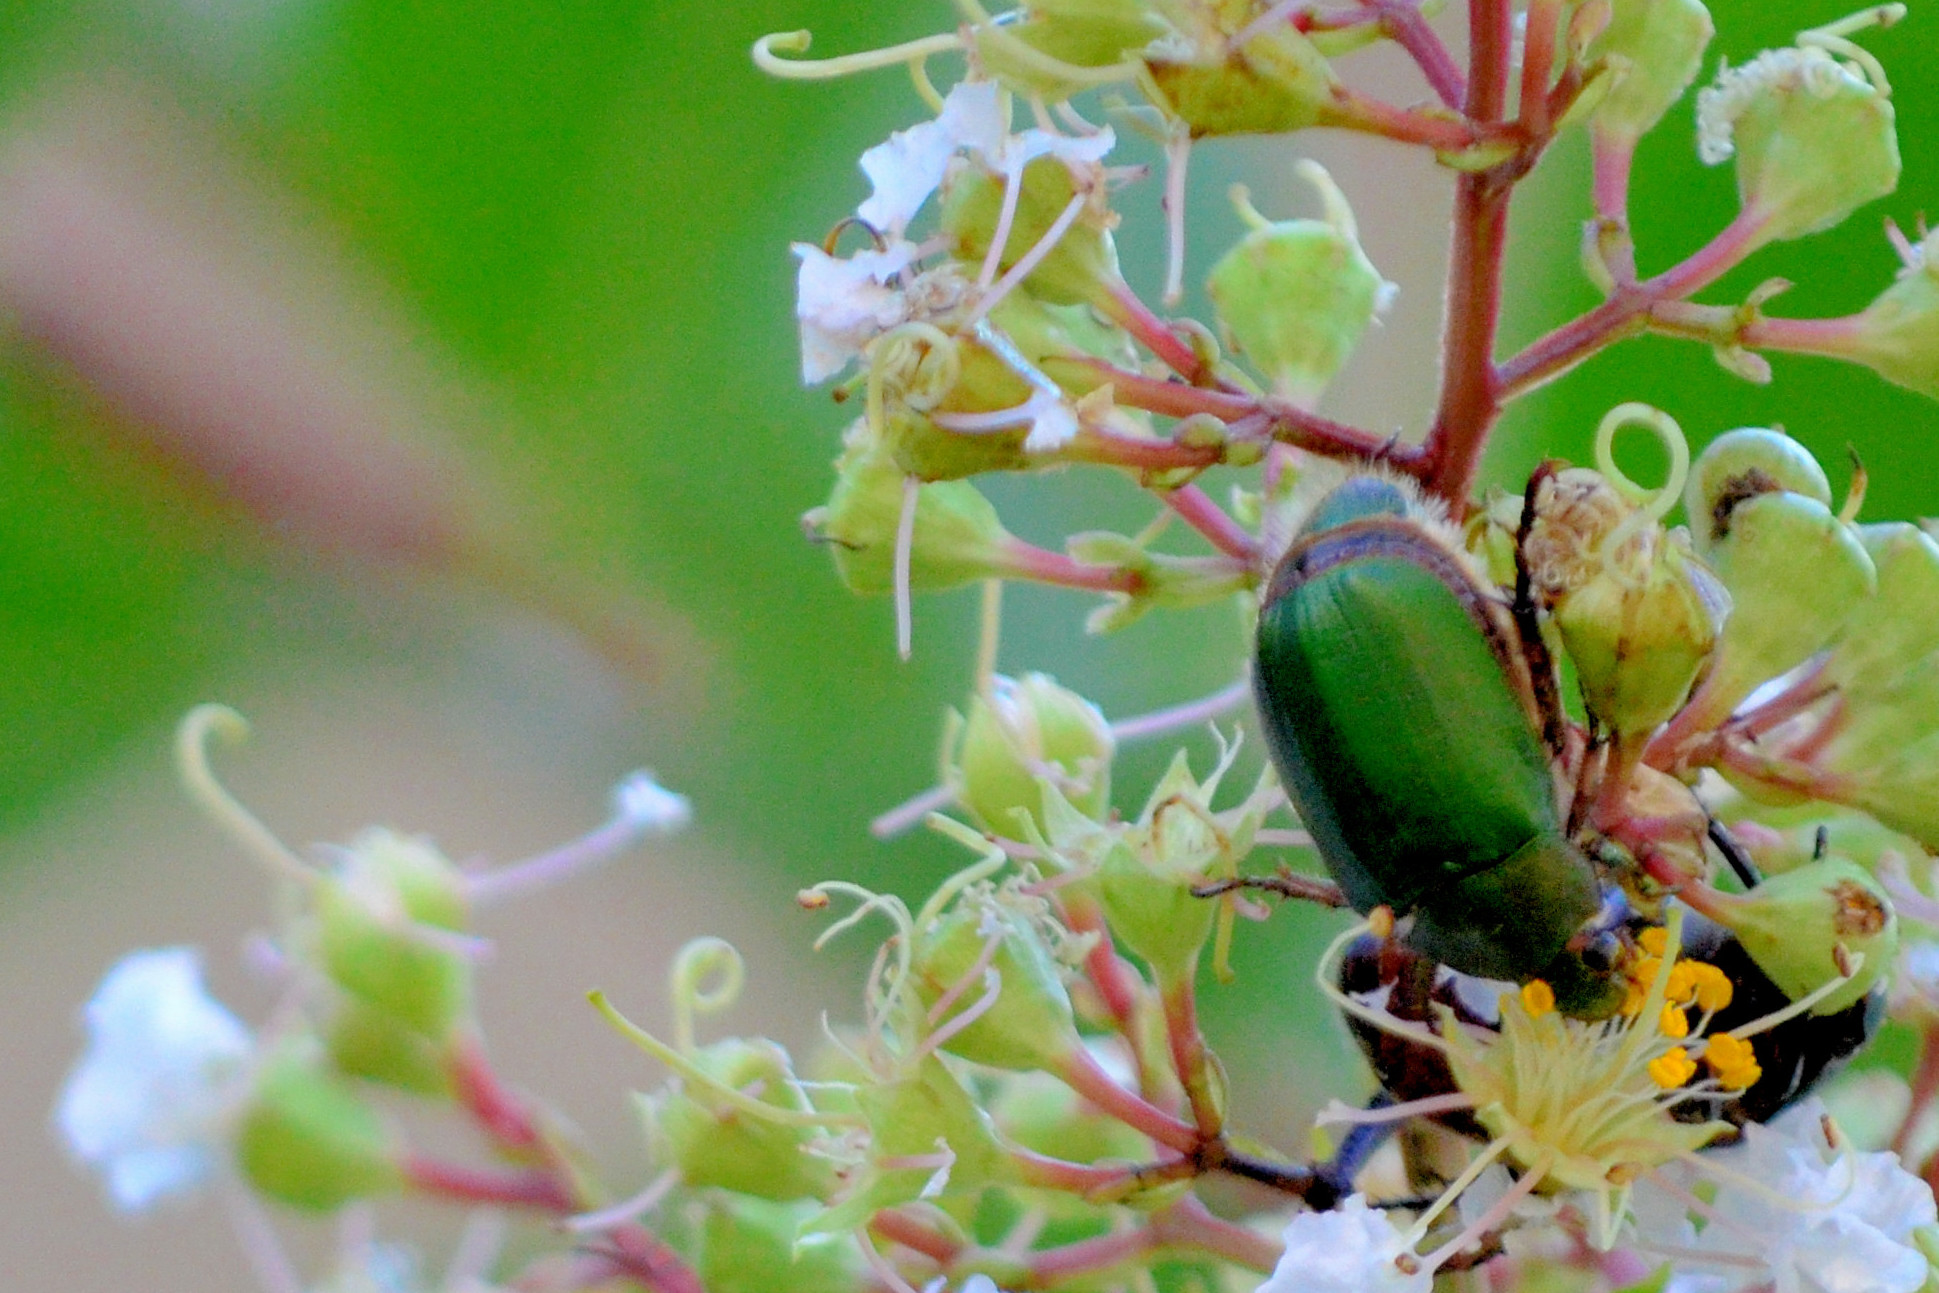 a bug that is perched on some flowers